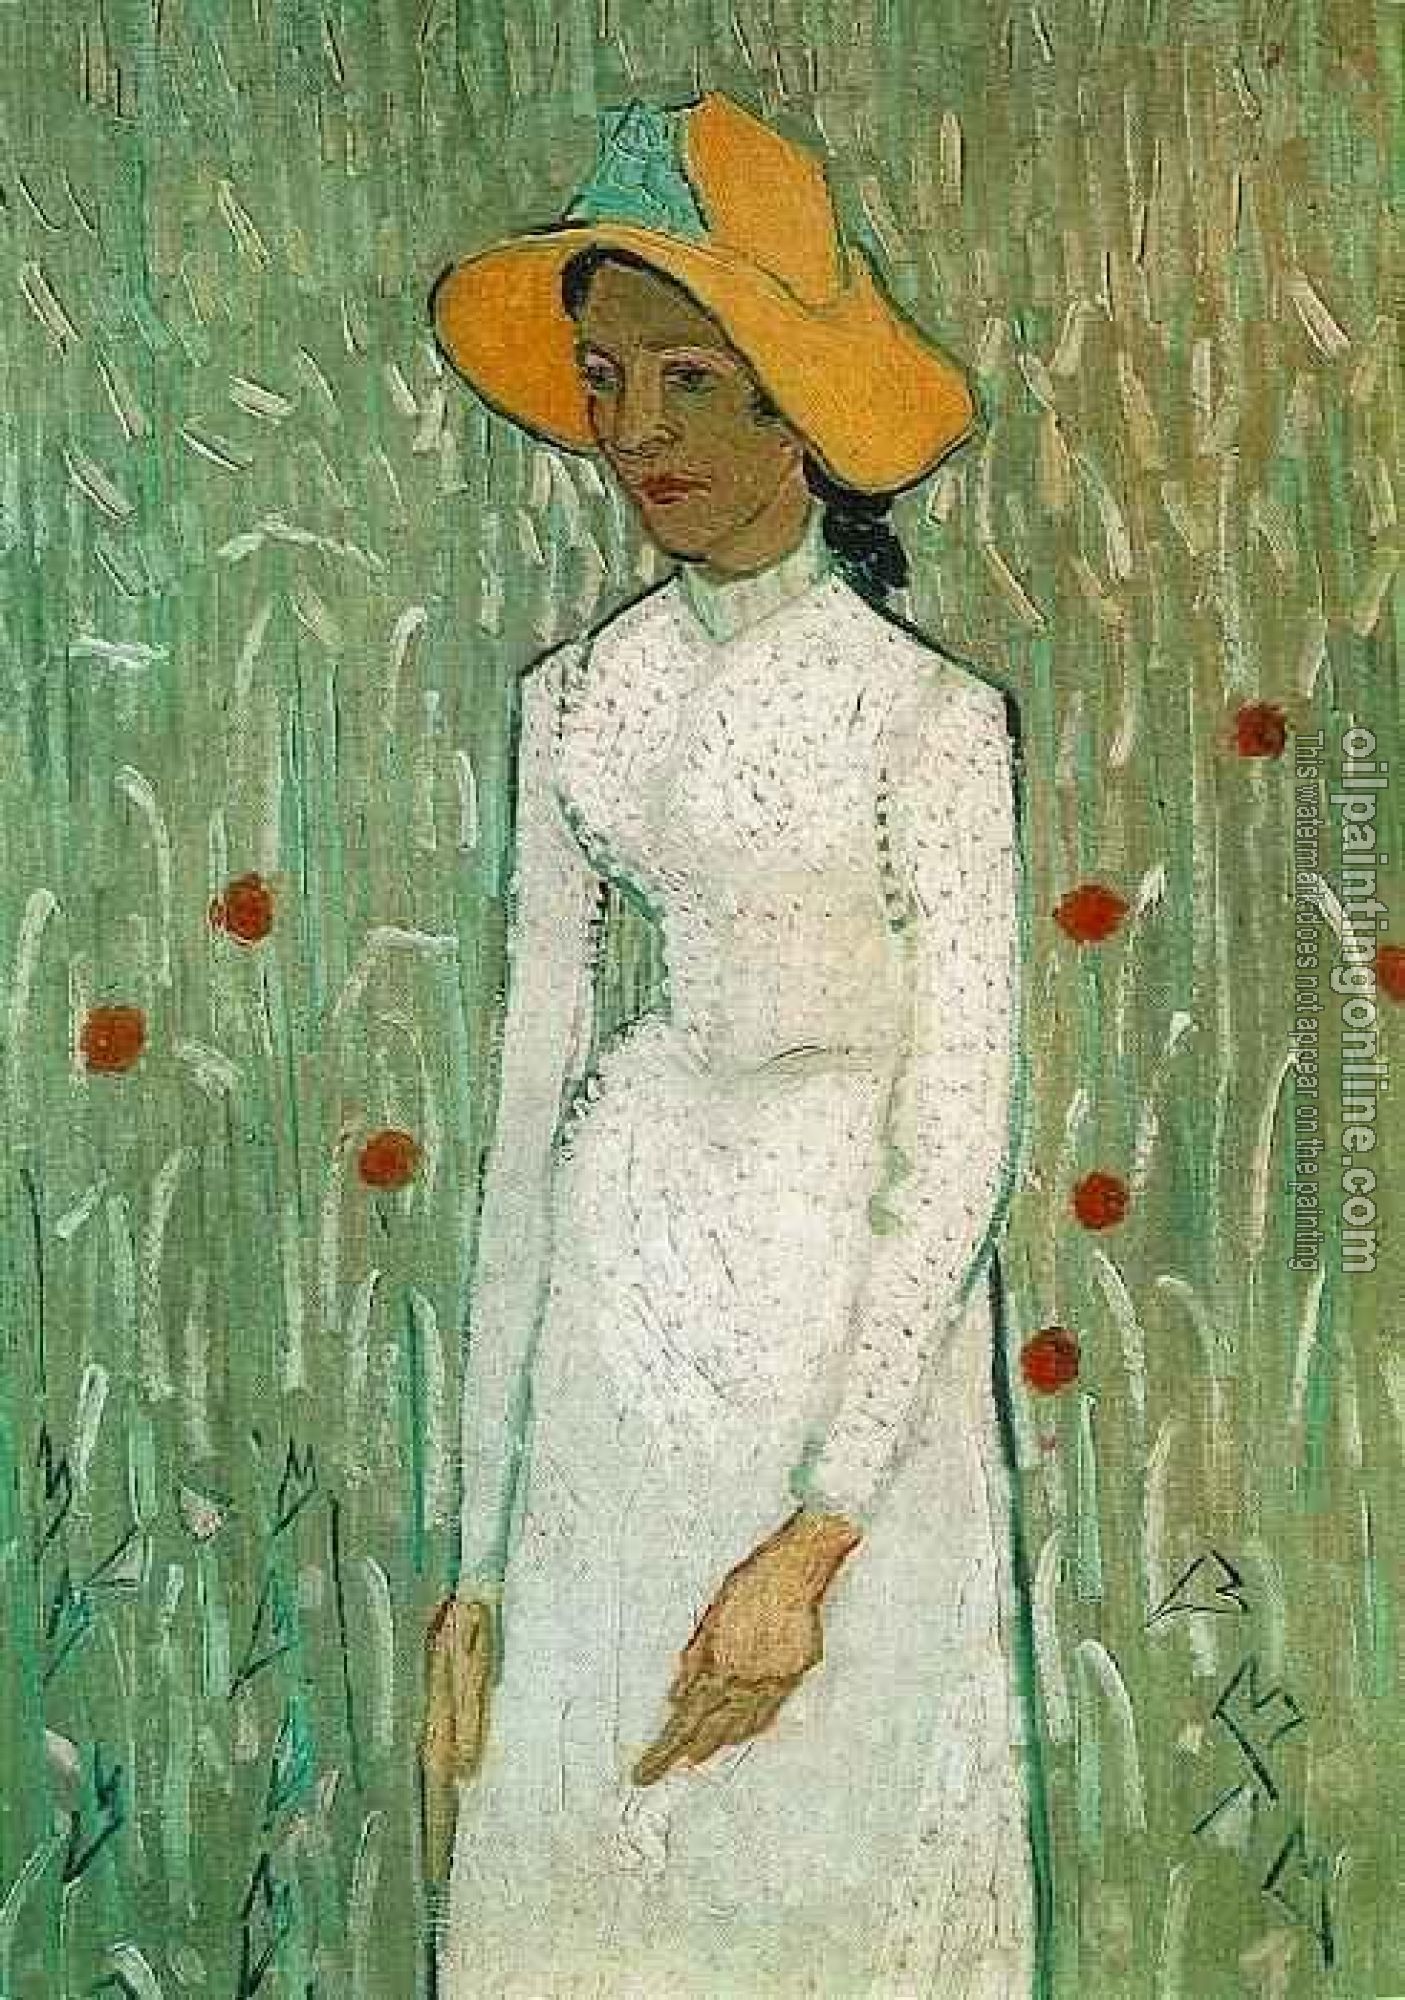 Gogh, Vincent van - Young Girl Standing Against a Background of Wheat